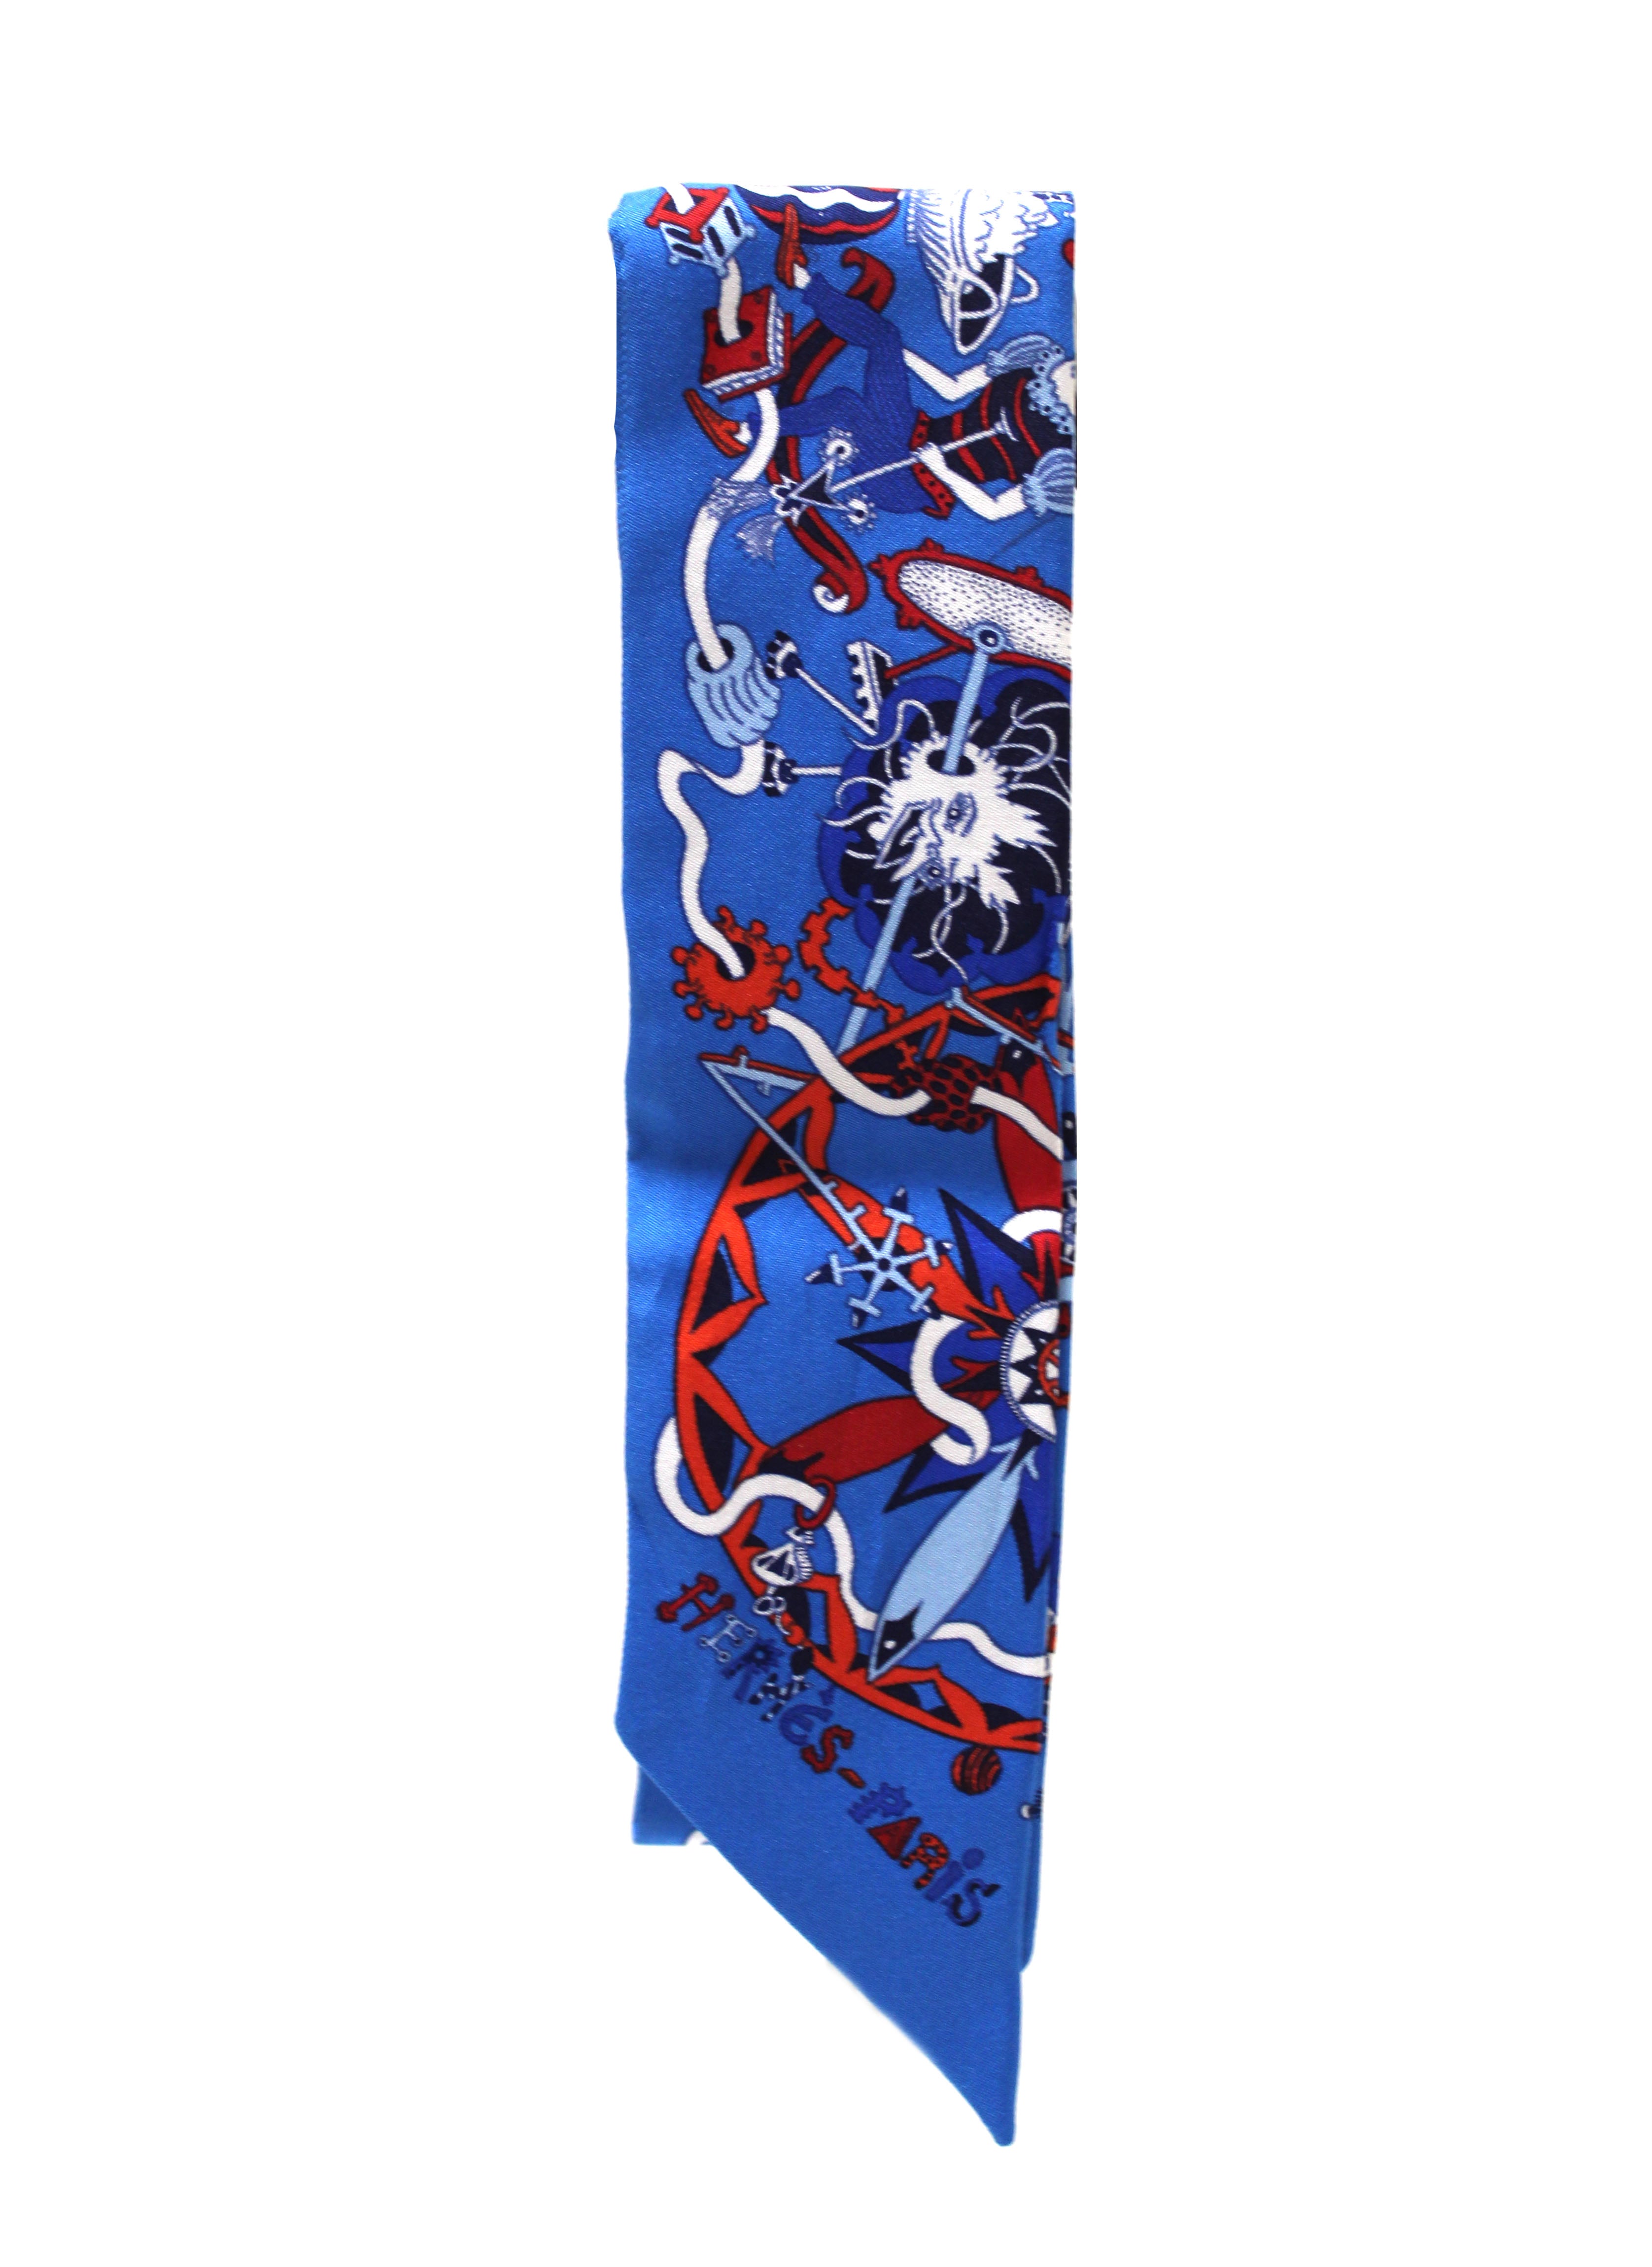 Louis Vuitton Red & Blue Twilly Scarf with Box